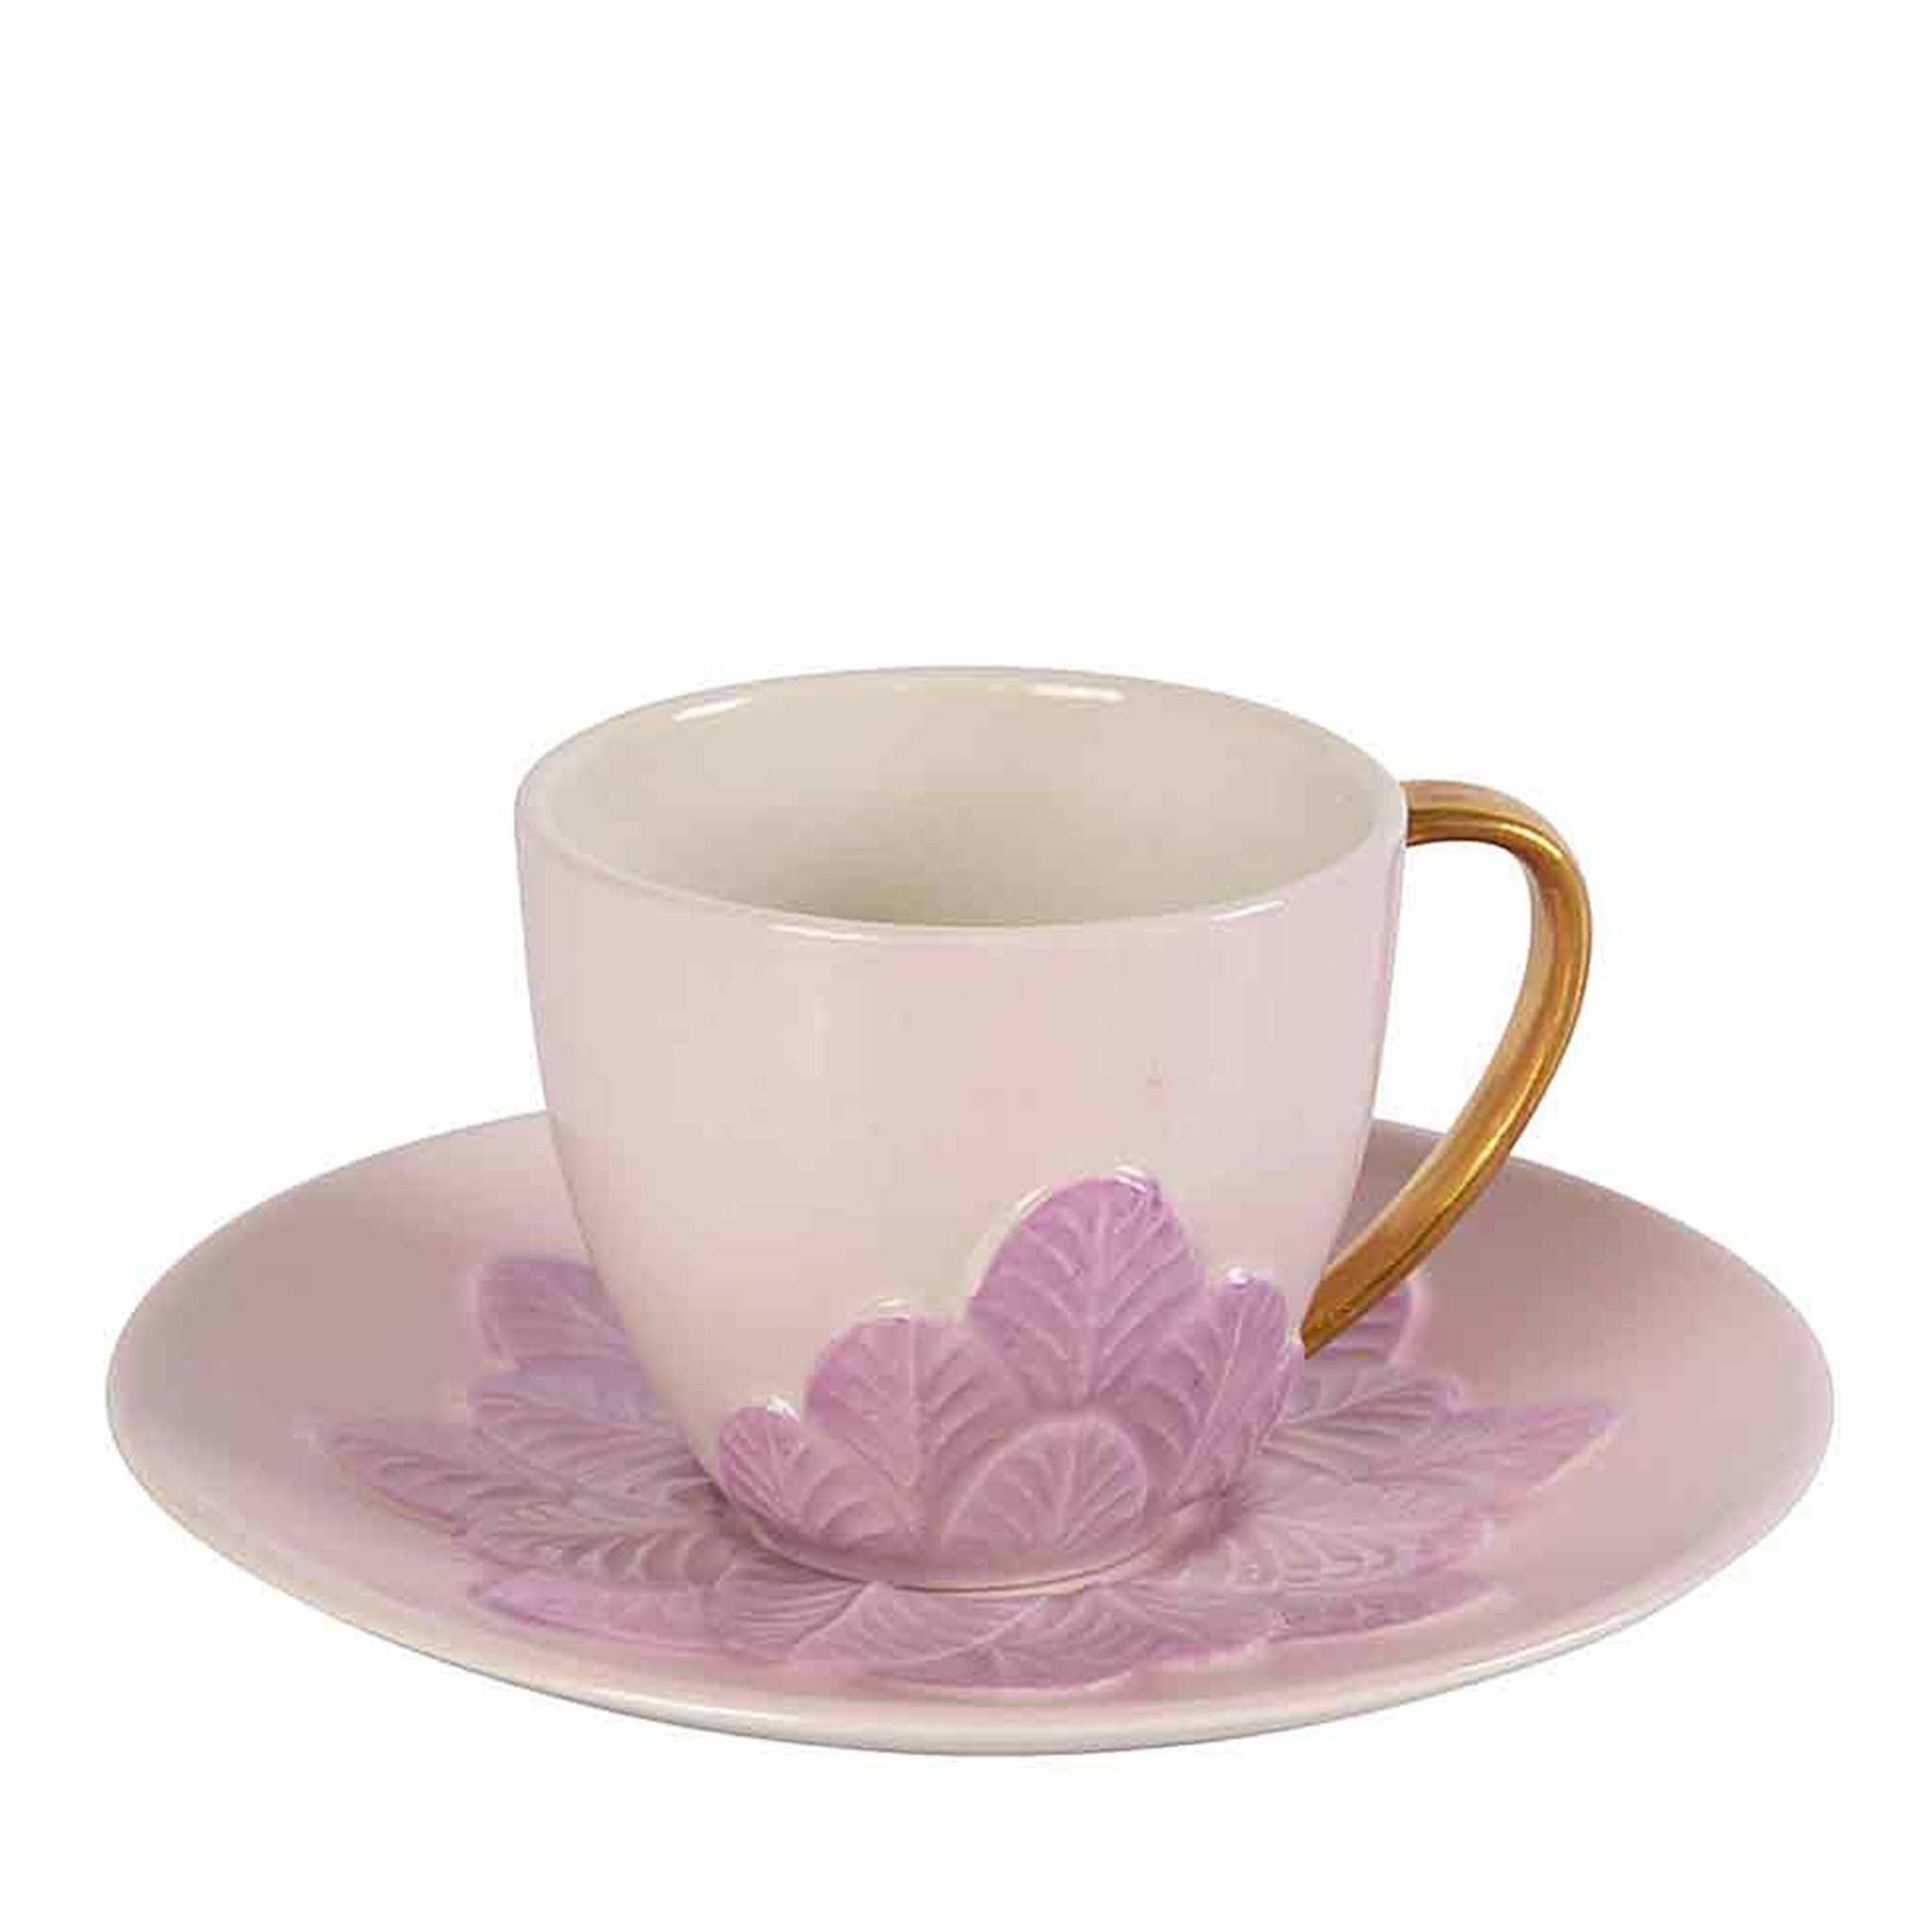  PEACOCK COFFEE CUP - PINK AND GOLD - Main view